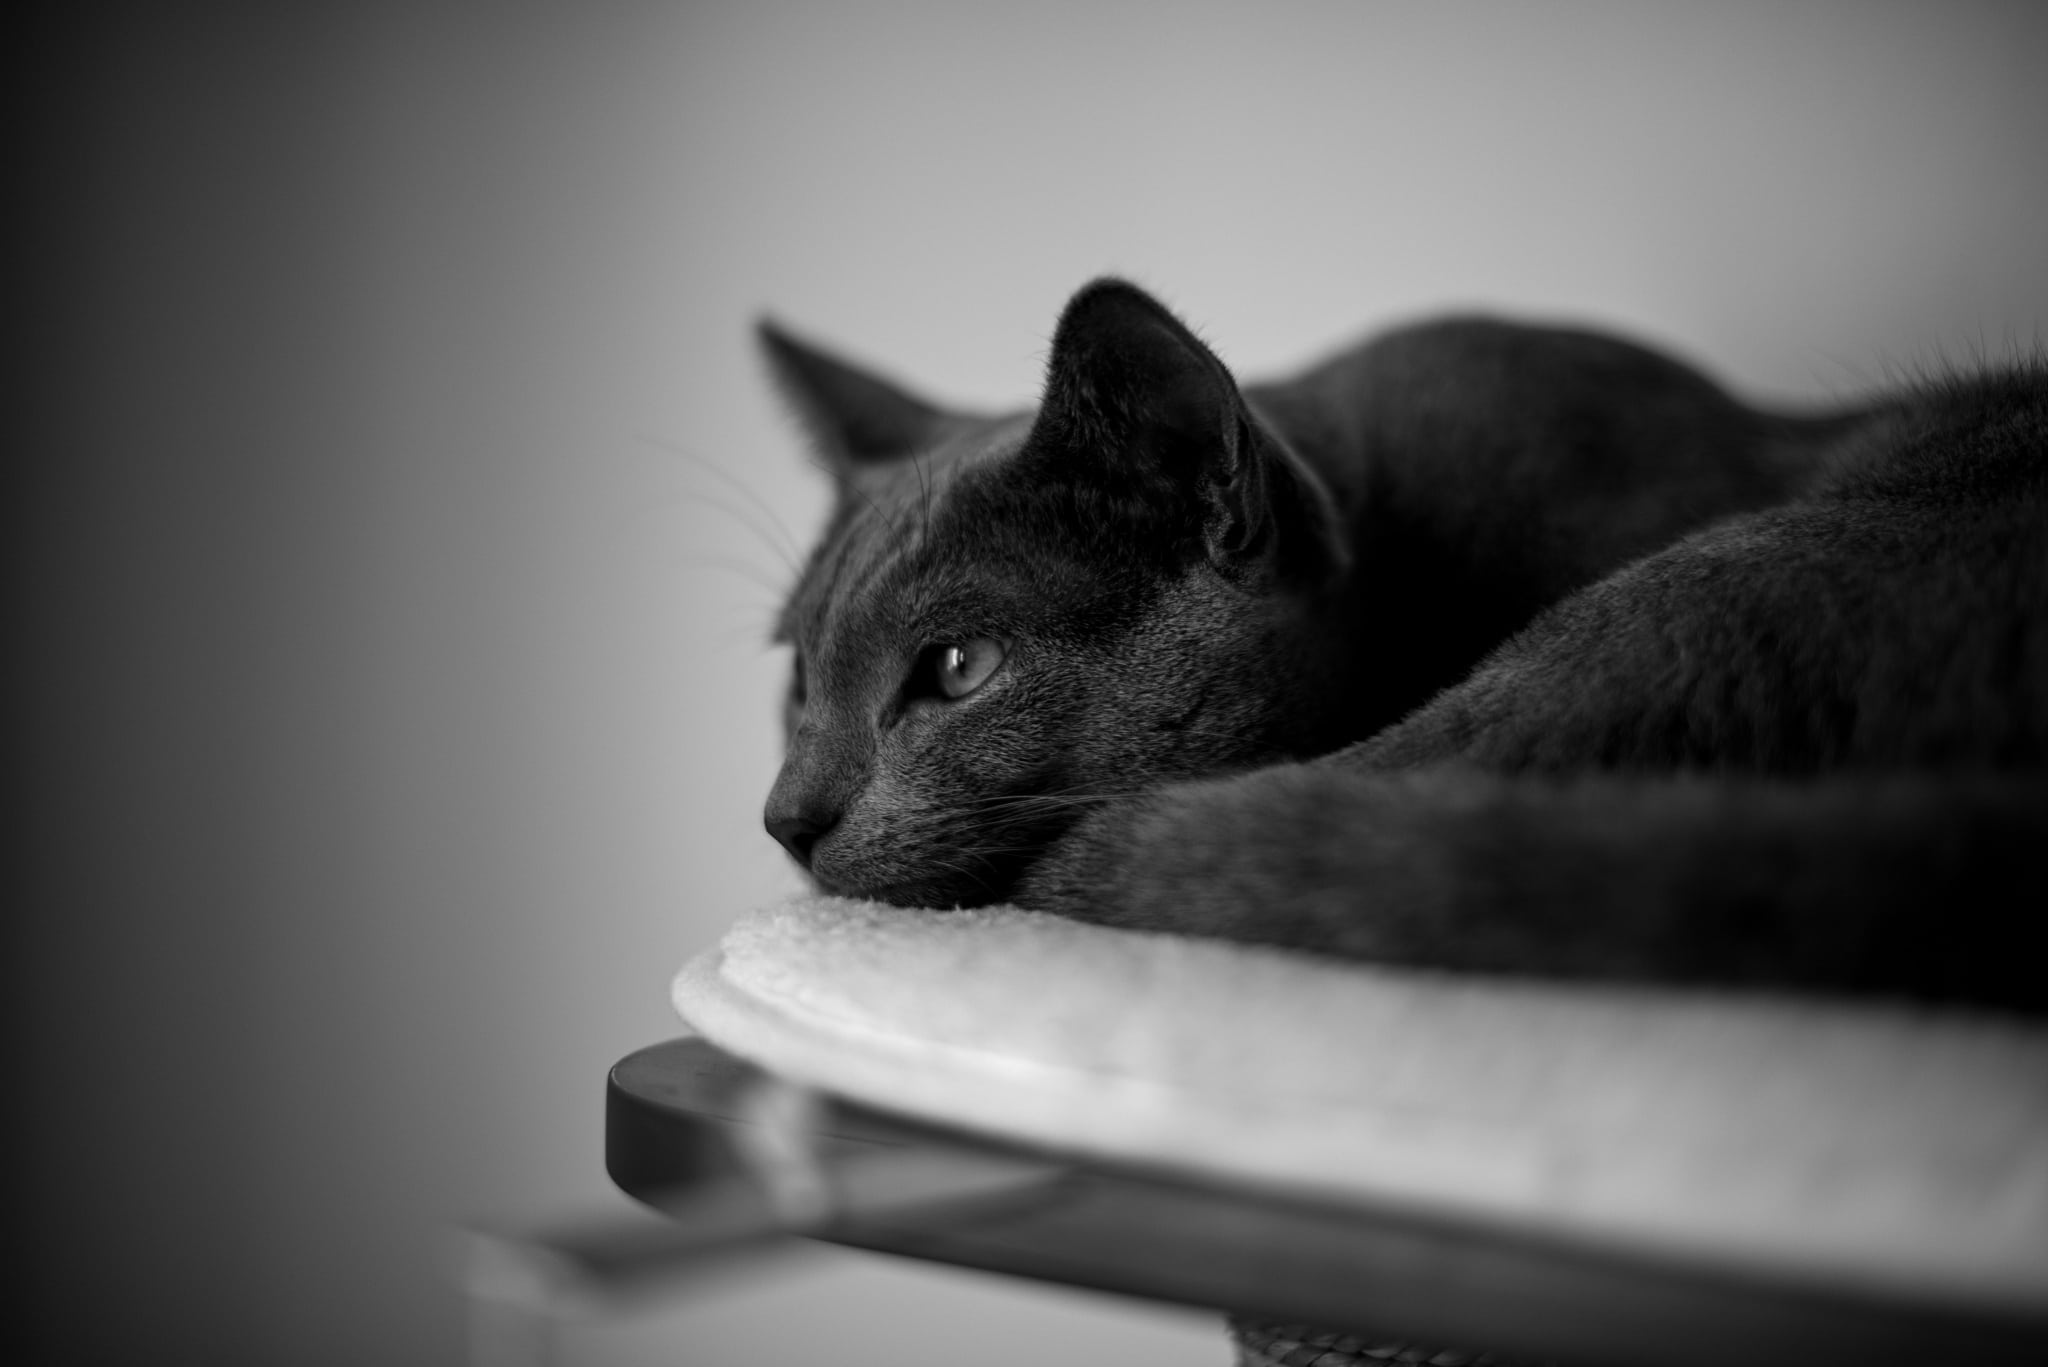 Tips for Editing Cat Photos